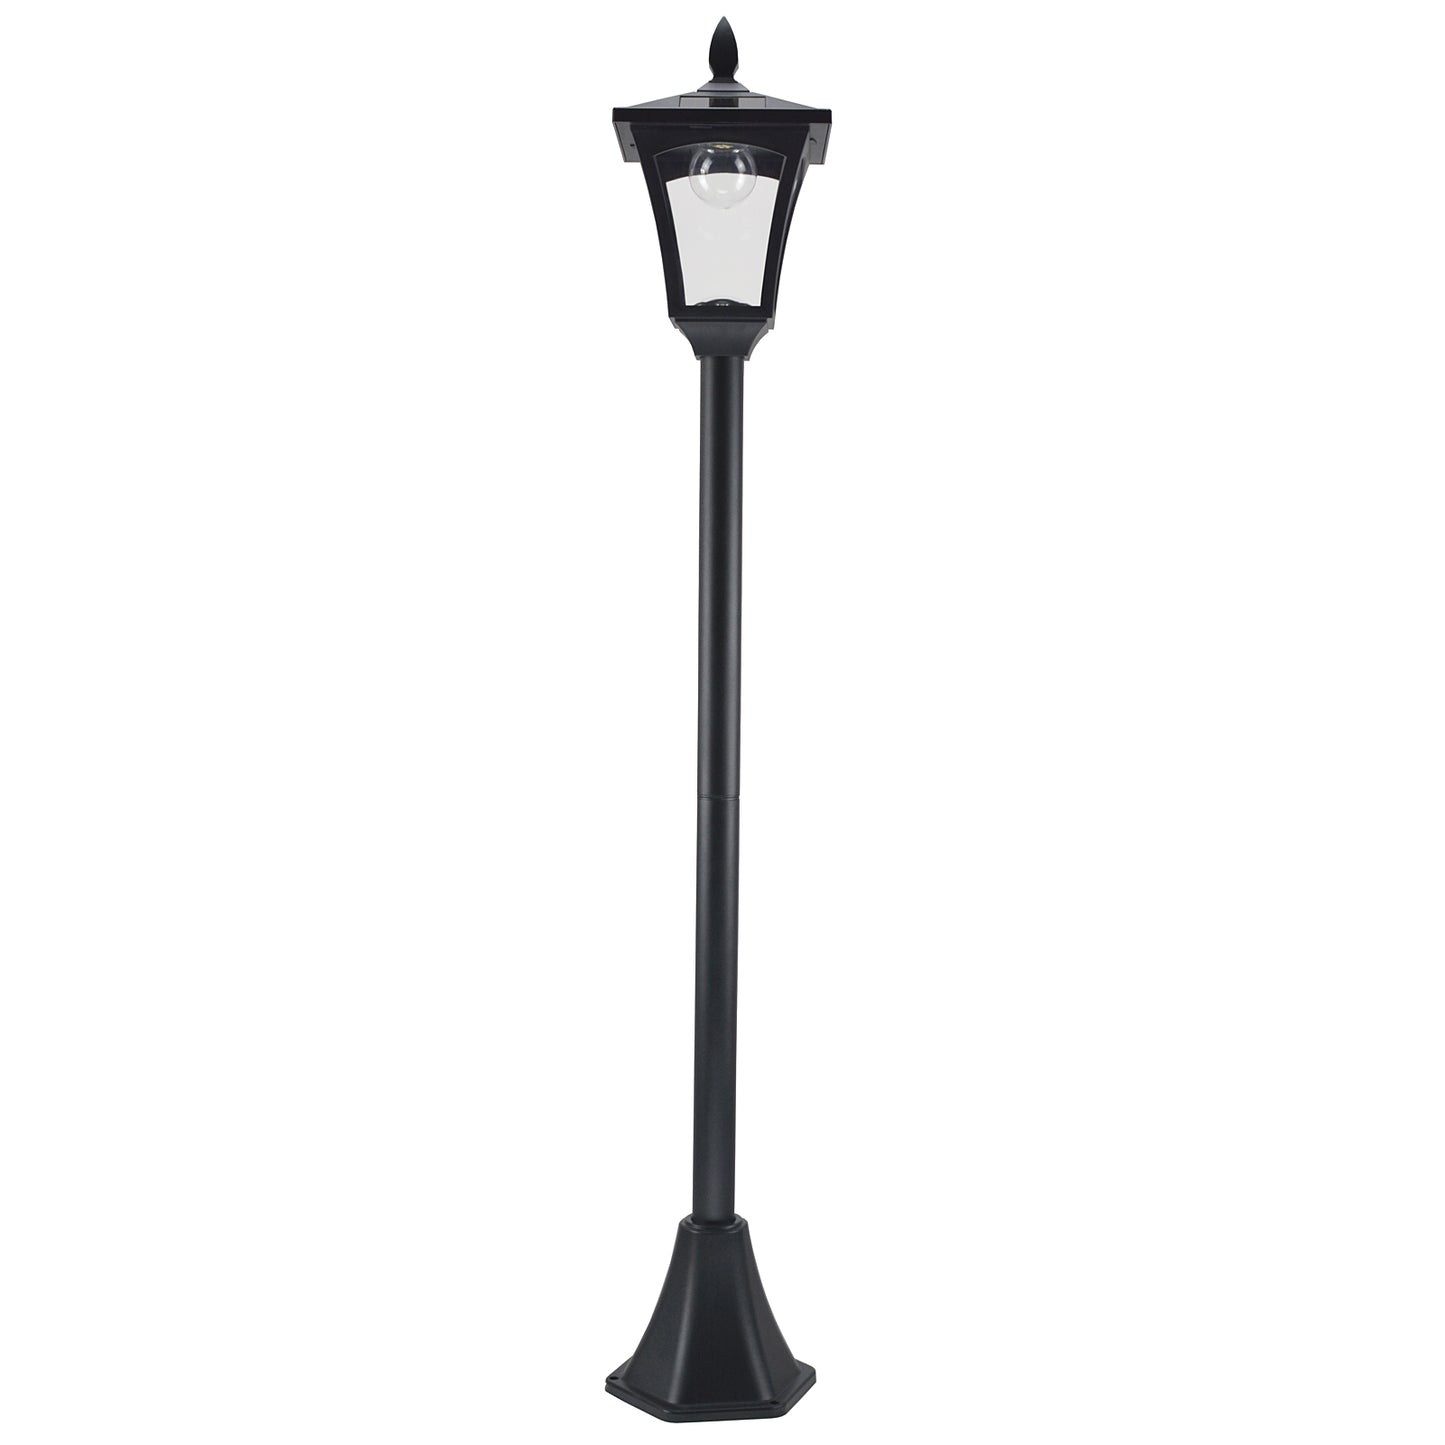 Outsunny Outdoor Solar Powered Post Lamp Sensor Dimmable LED Lantern Bollard Pathway 1.6M Tall – Black